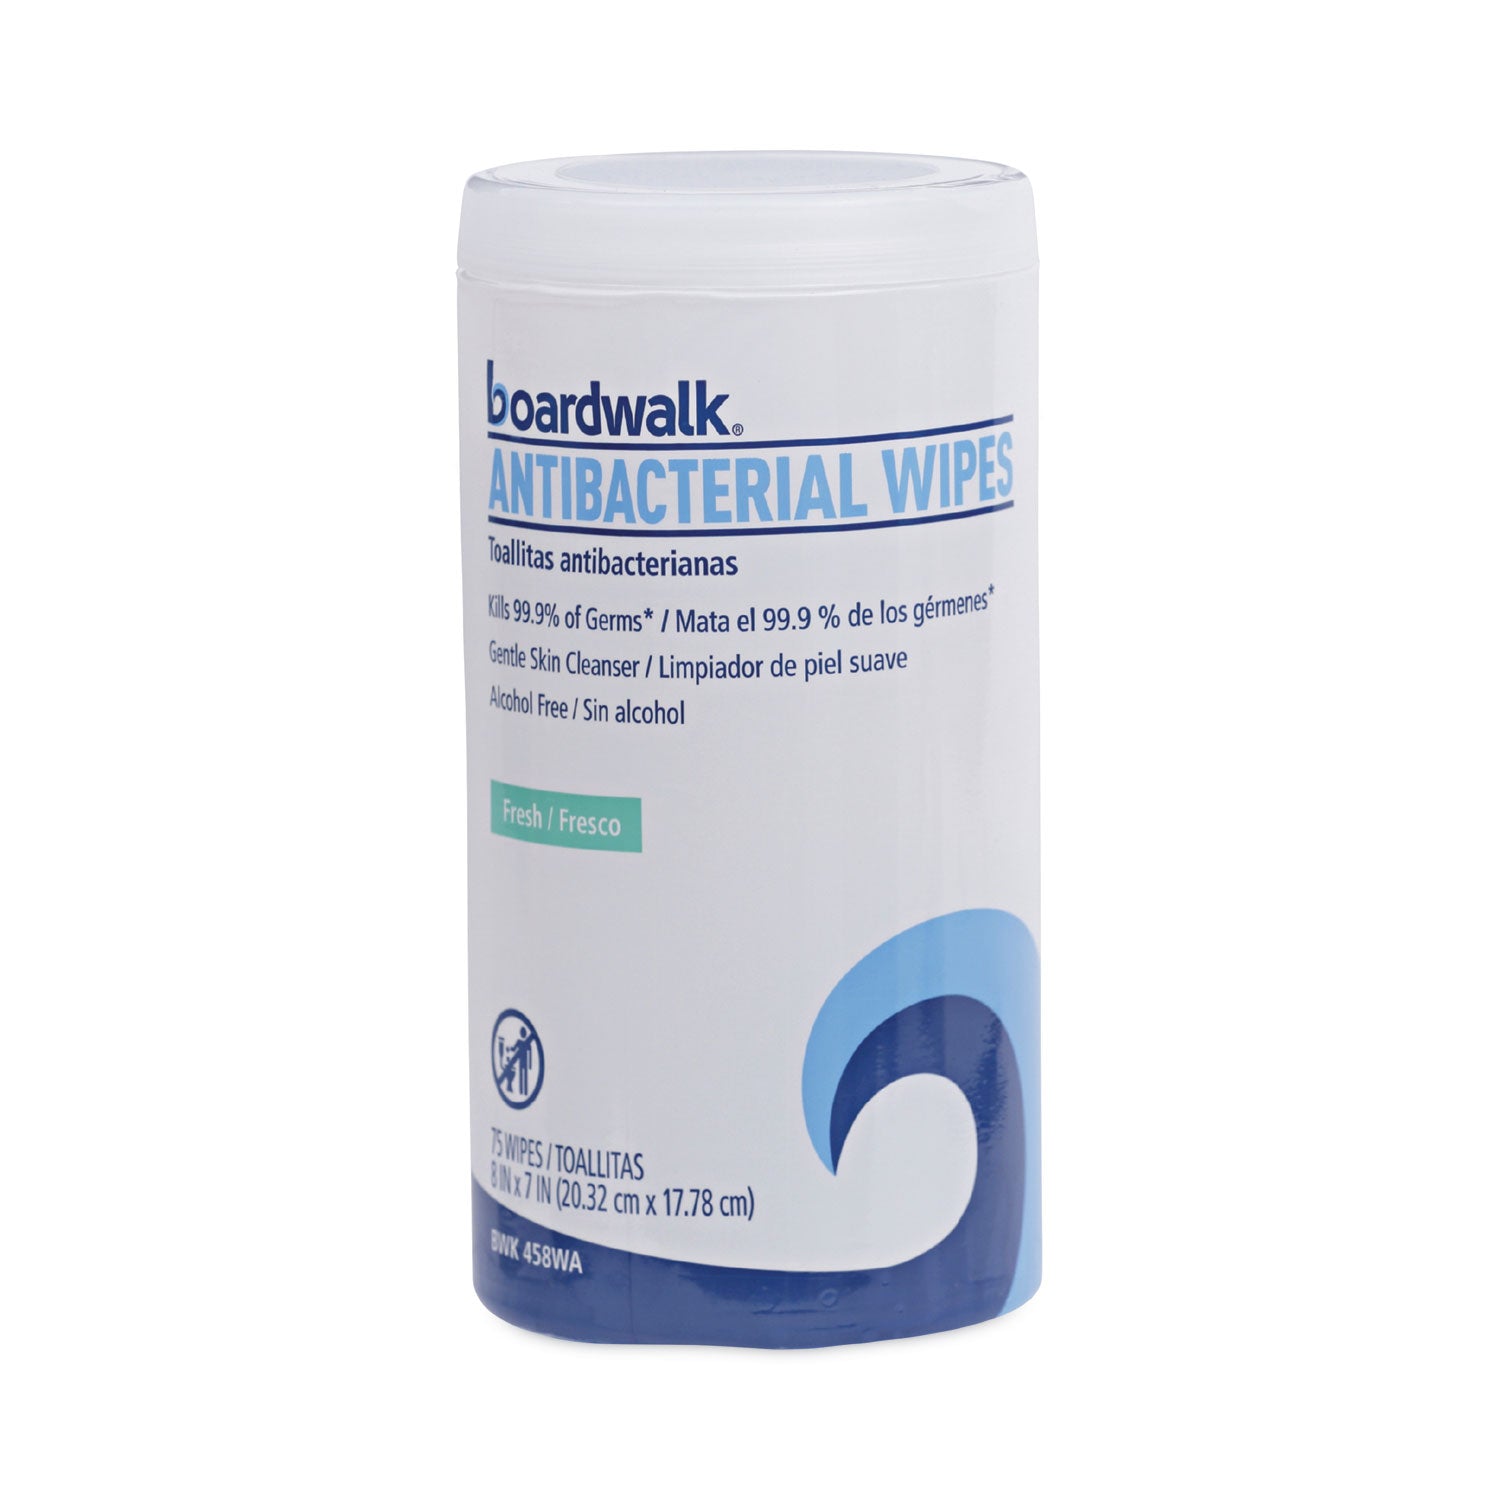 antibacterial-wipes-54-x-8-fresh-scent-75-canister-6-canisters-carton_bwk458wa - 1